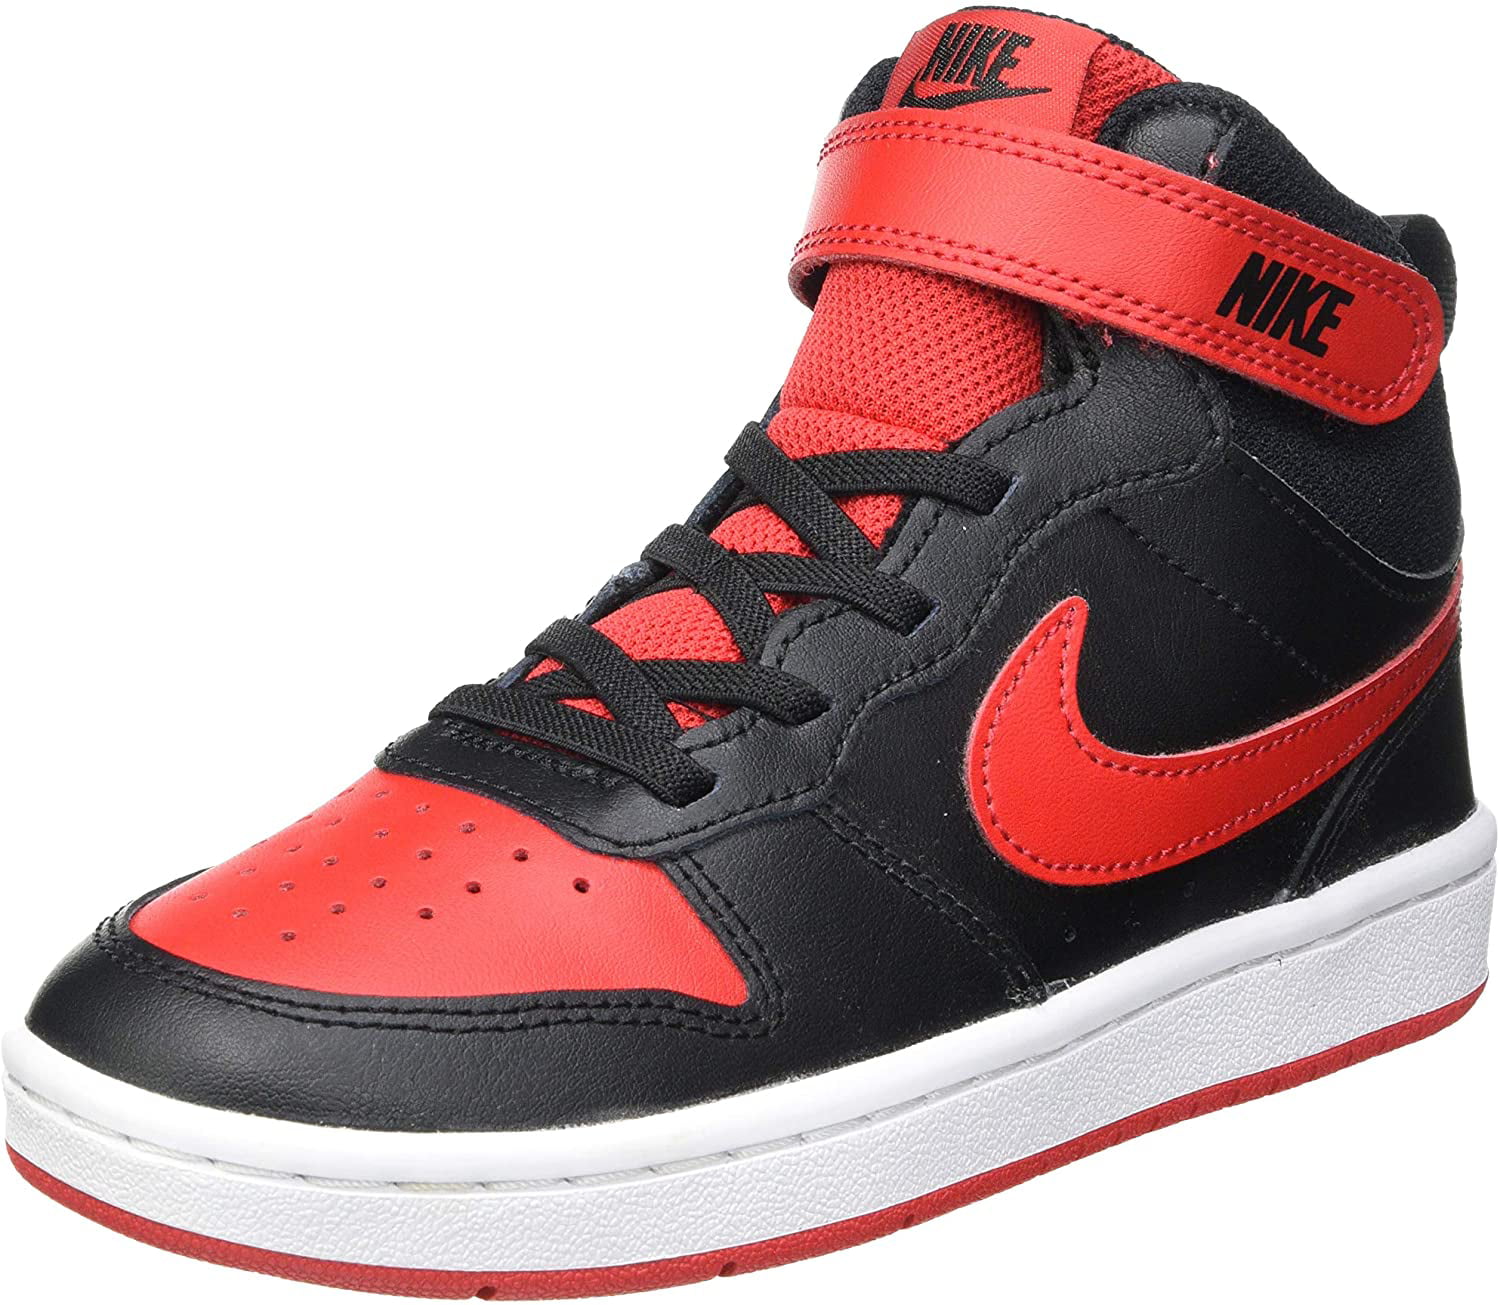 Nike Court Borough Mid 2 Gs Trainers Child Black/Red High Top Shoes Walmart.com